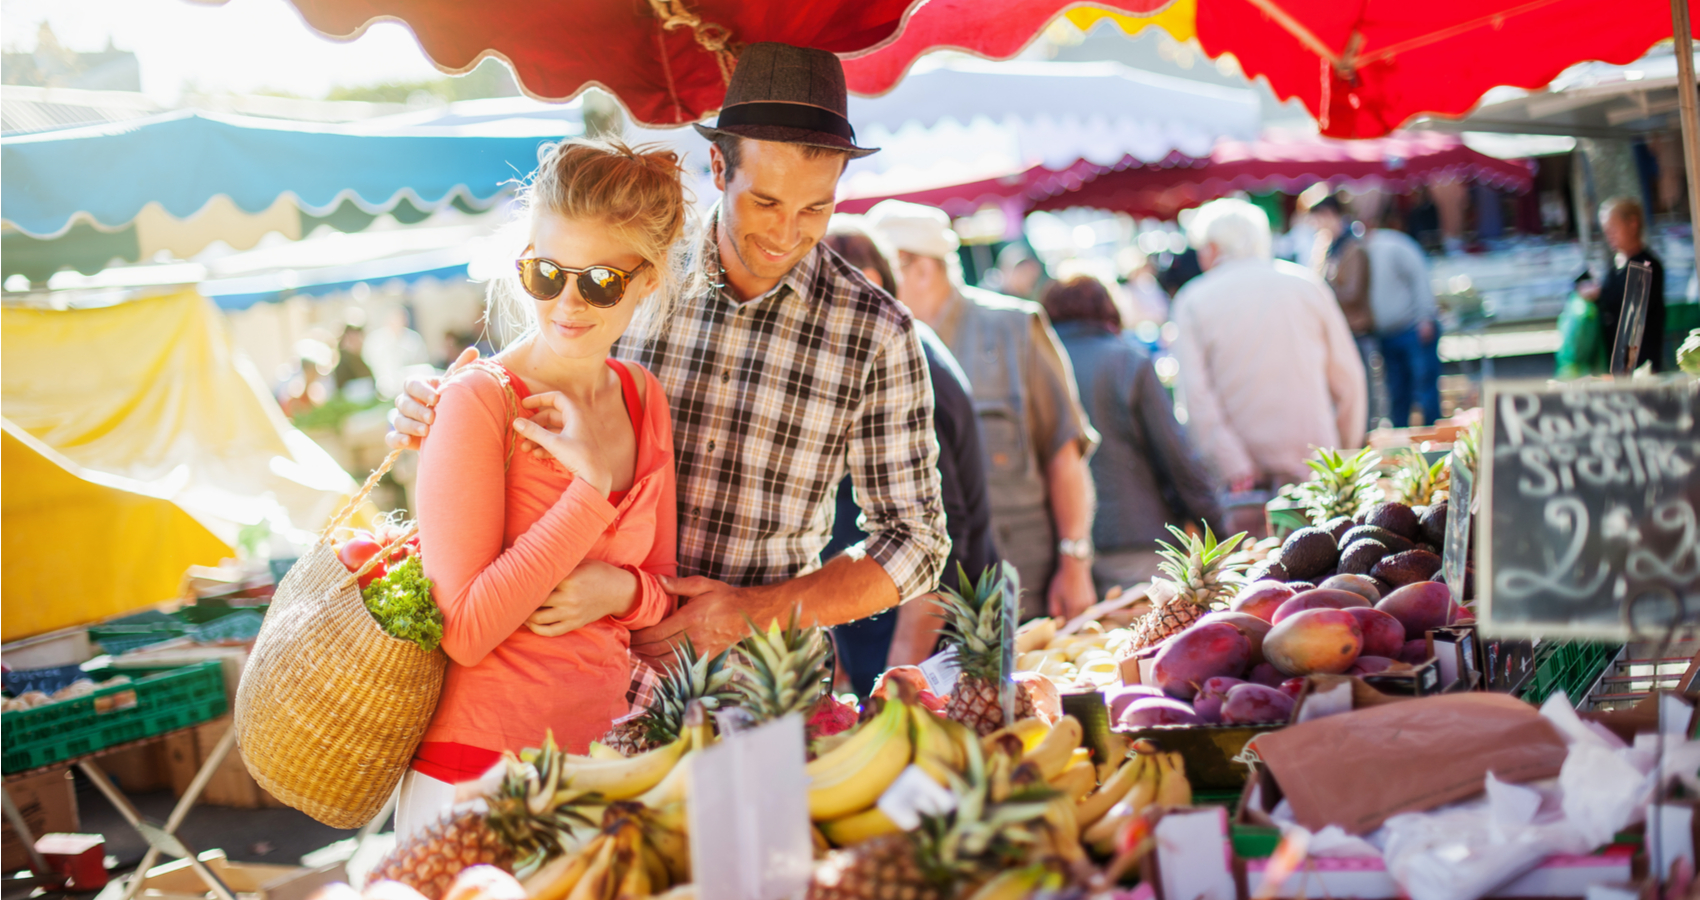 Shop Your Local Farmers’ Markets for Heart-Healthy Foods